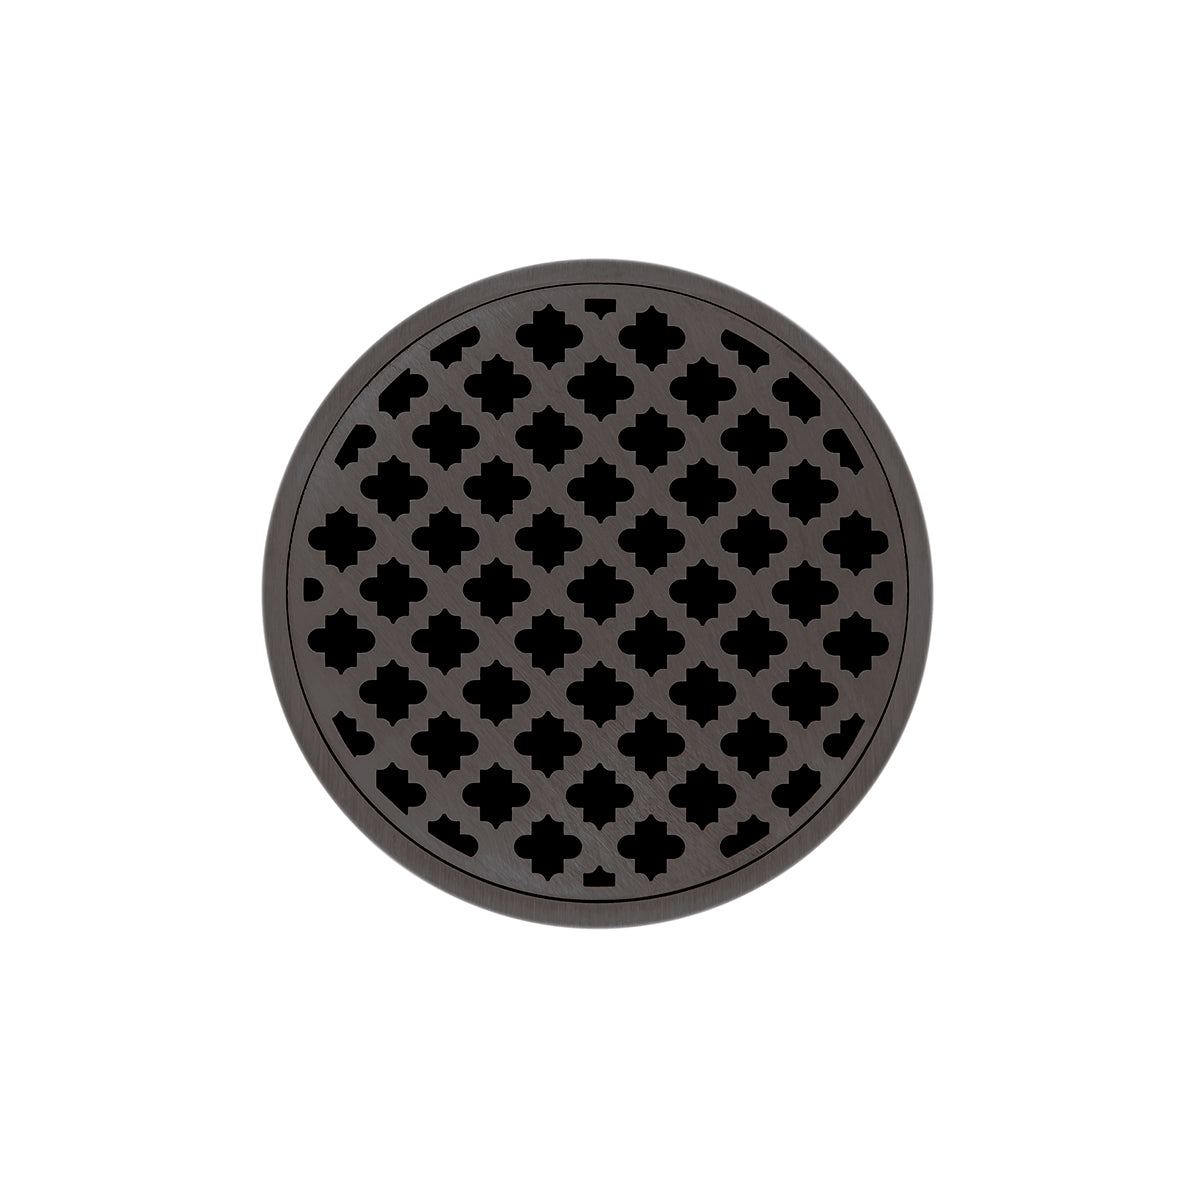 Infinity Drain 5" Round RMD 5 Premium Center Drain Kit with Moor Pattern Decorative Plate with Cast Iron Drain Body for Hot Mop, 2" Outlet